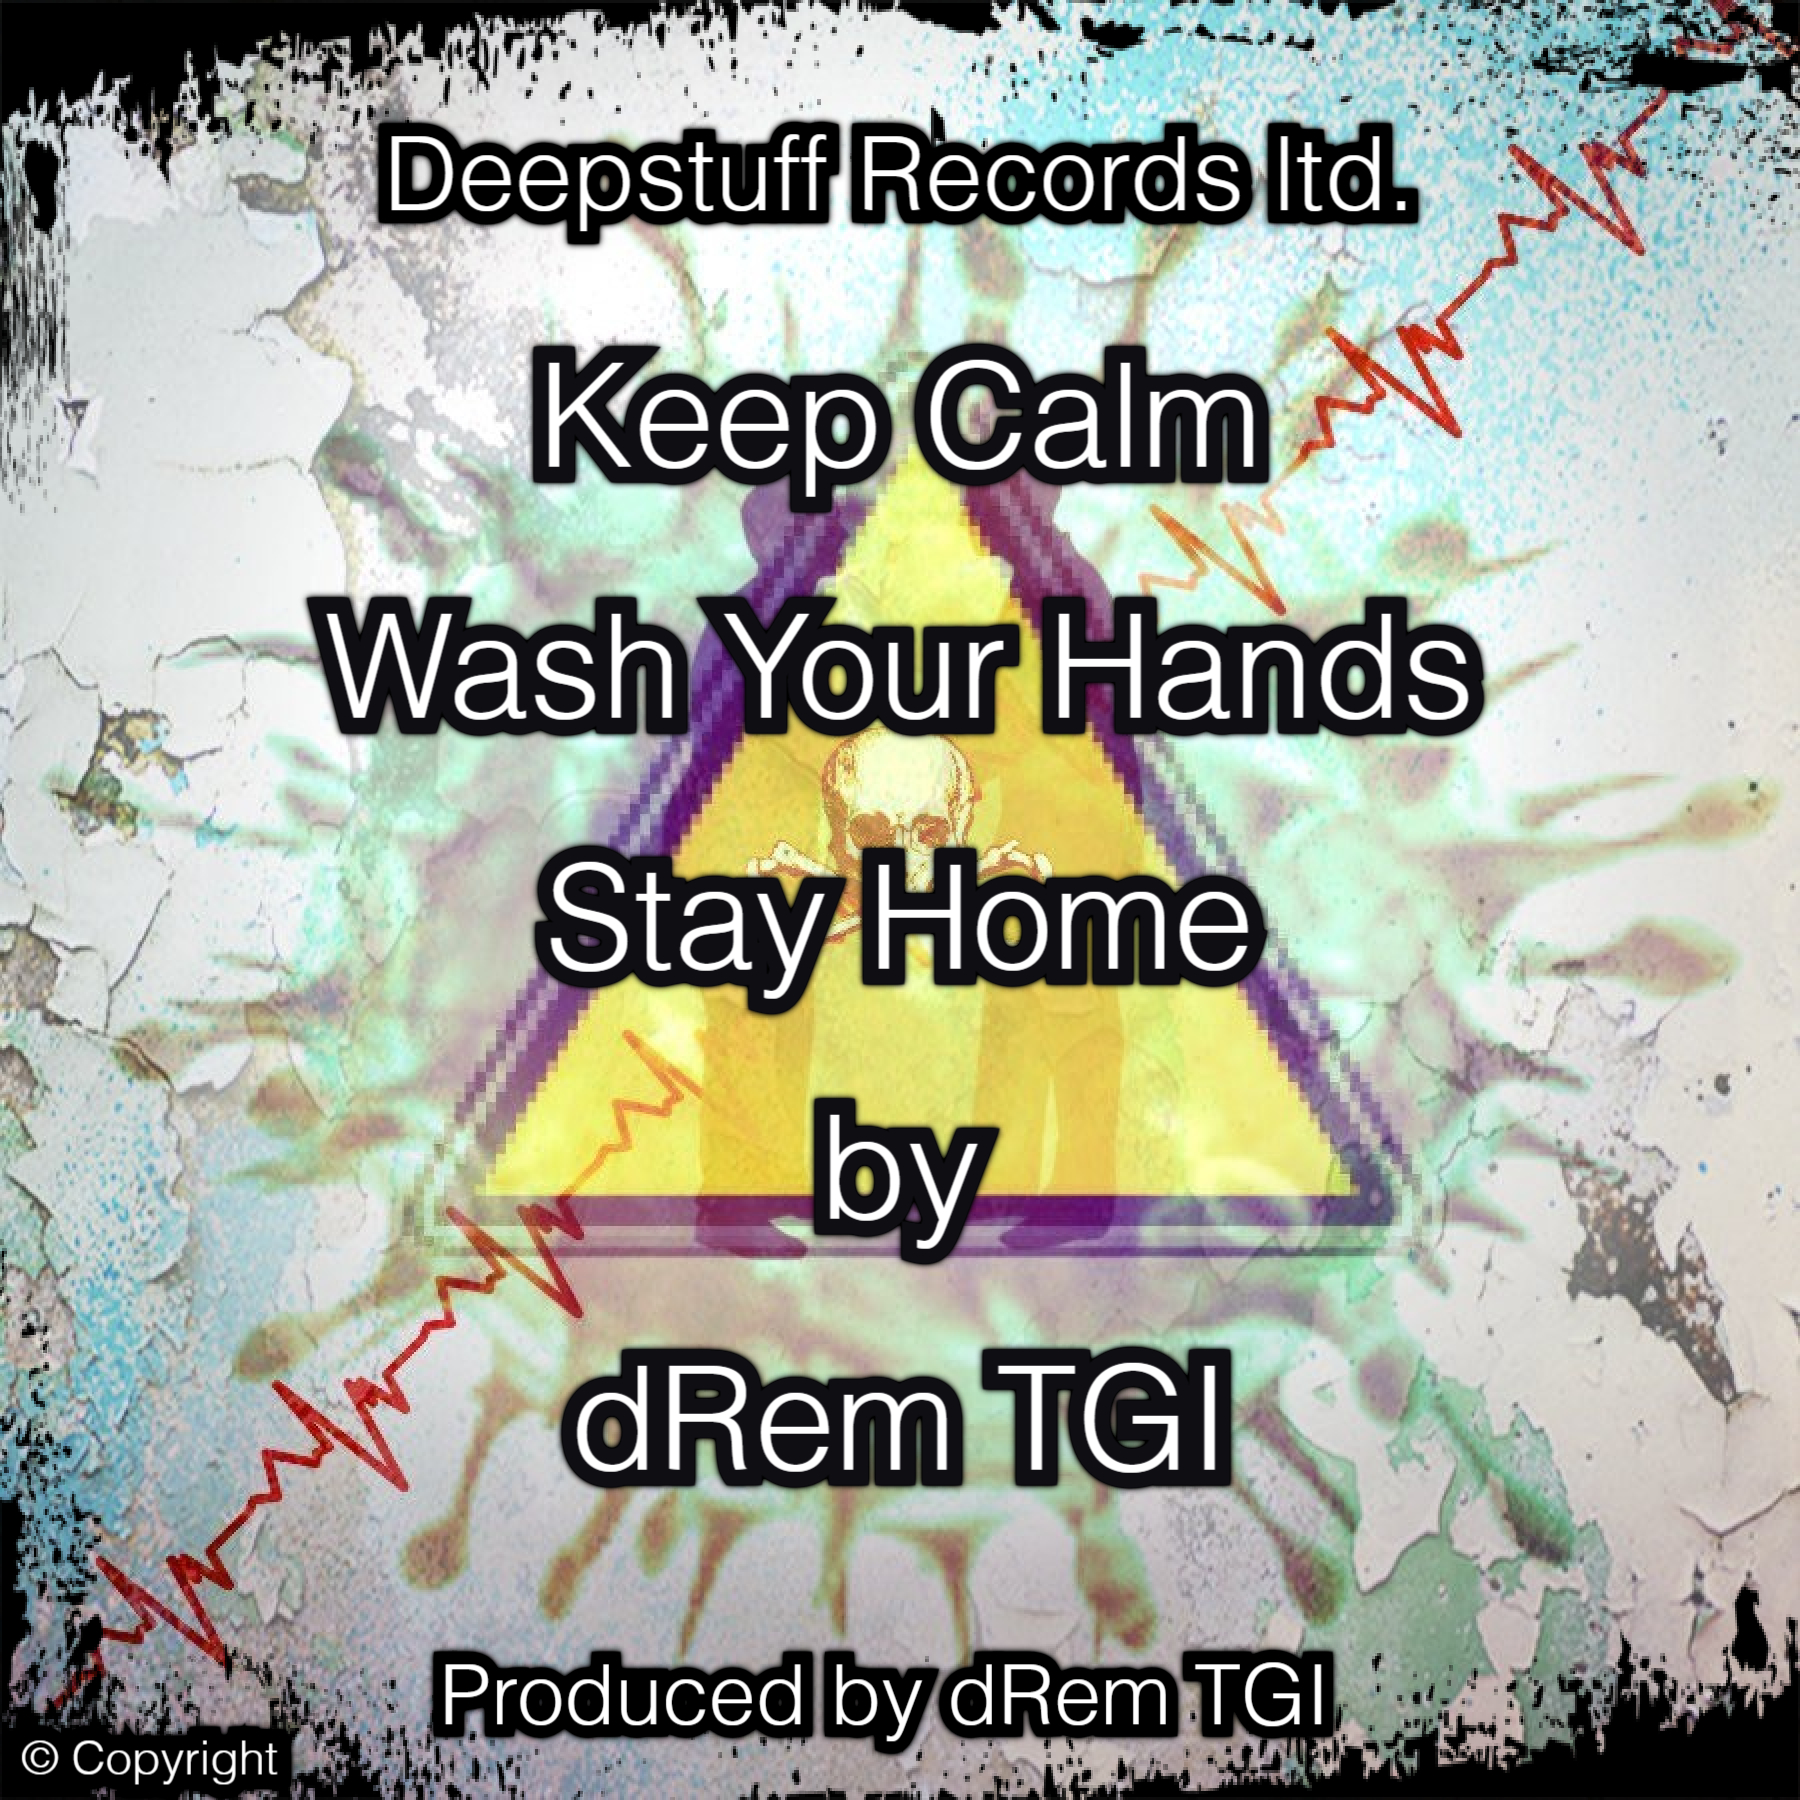 Keep Calm Wash Your Hands Stay Home